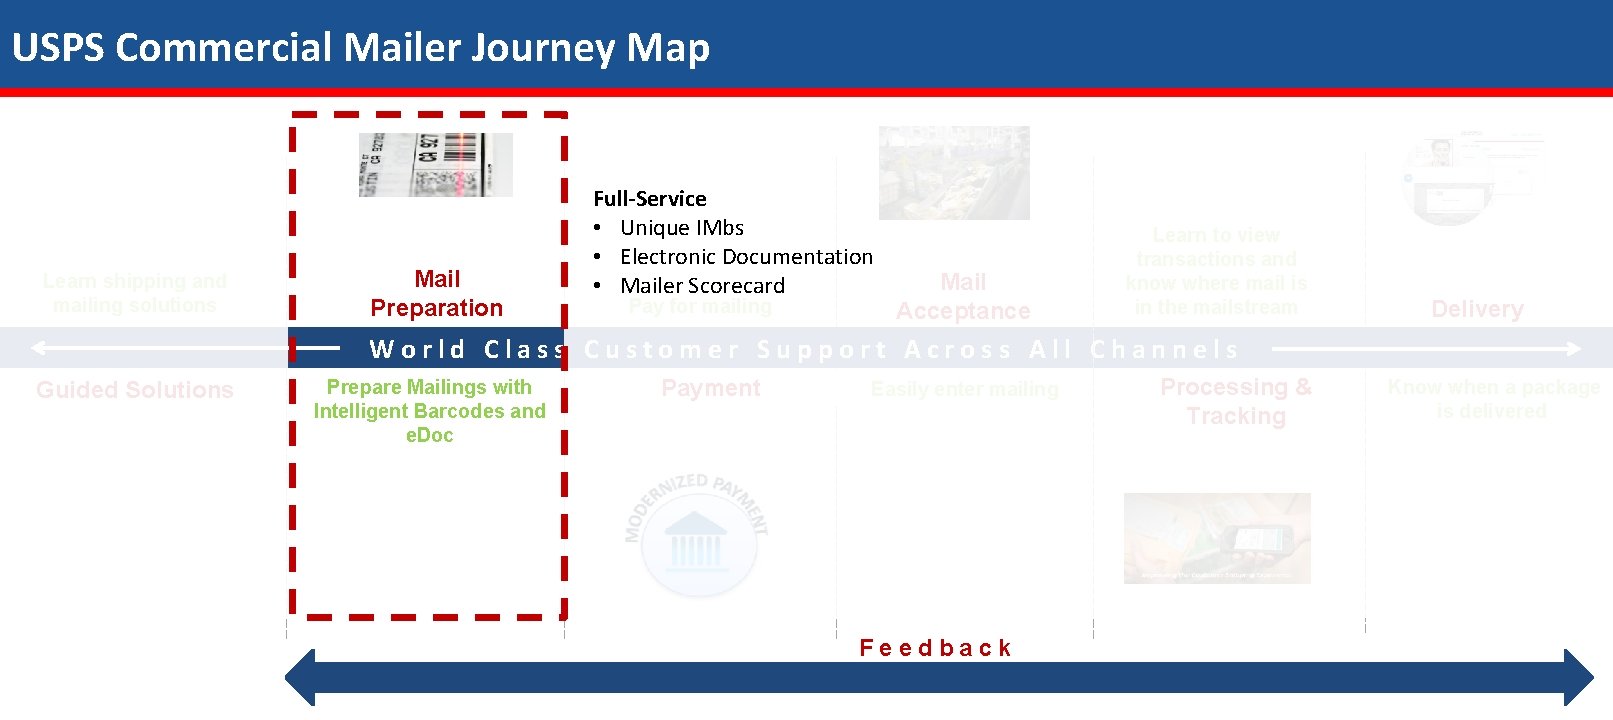 USPS Commercial Mailer Journey Map Learn shipping and mailing solutions Mail Preparation Full-Service •